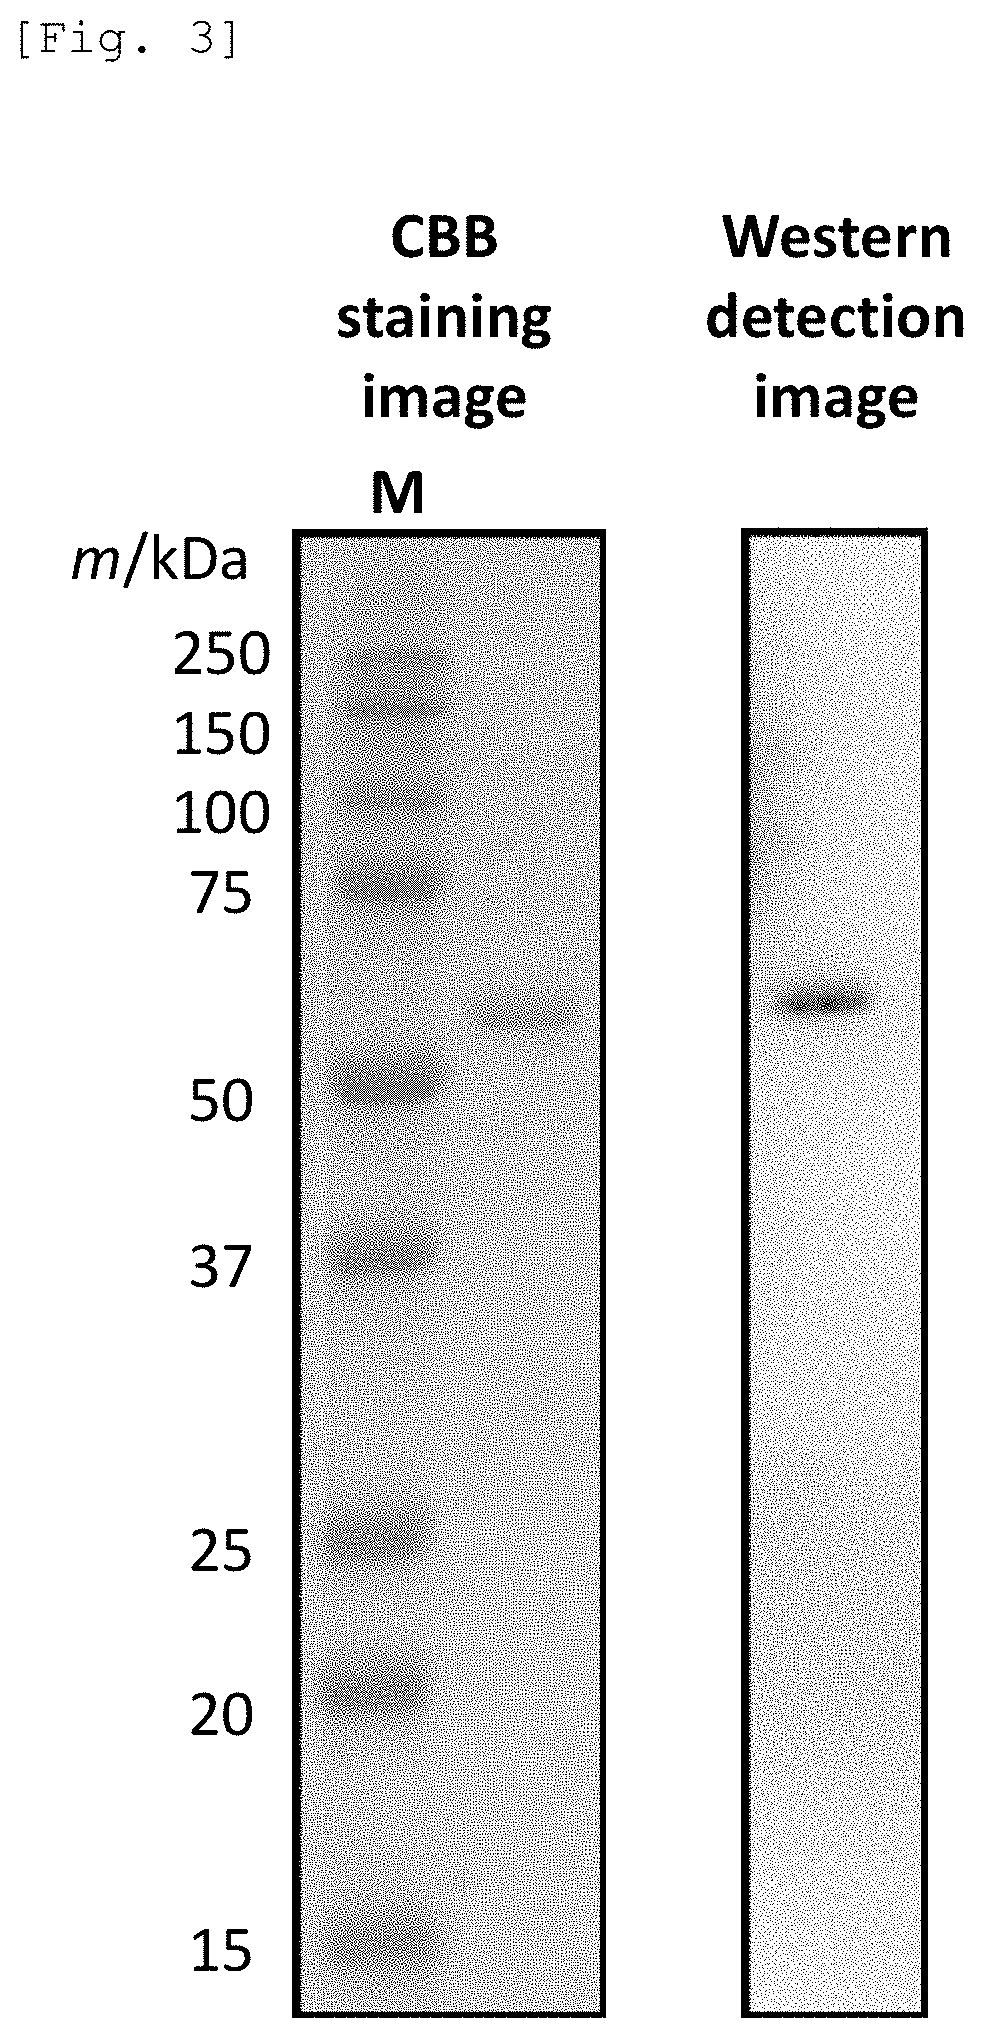 Method for producing a protein and disaccharide using a <i>Talaromyces cellulolyticus</i>